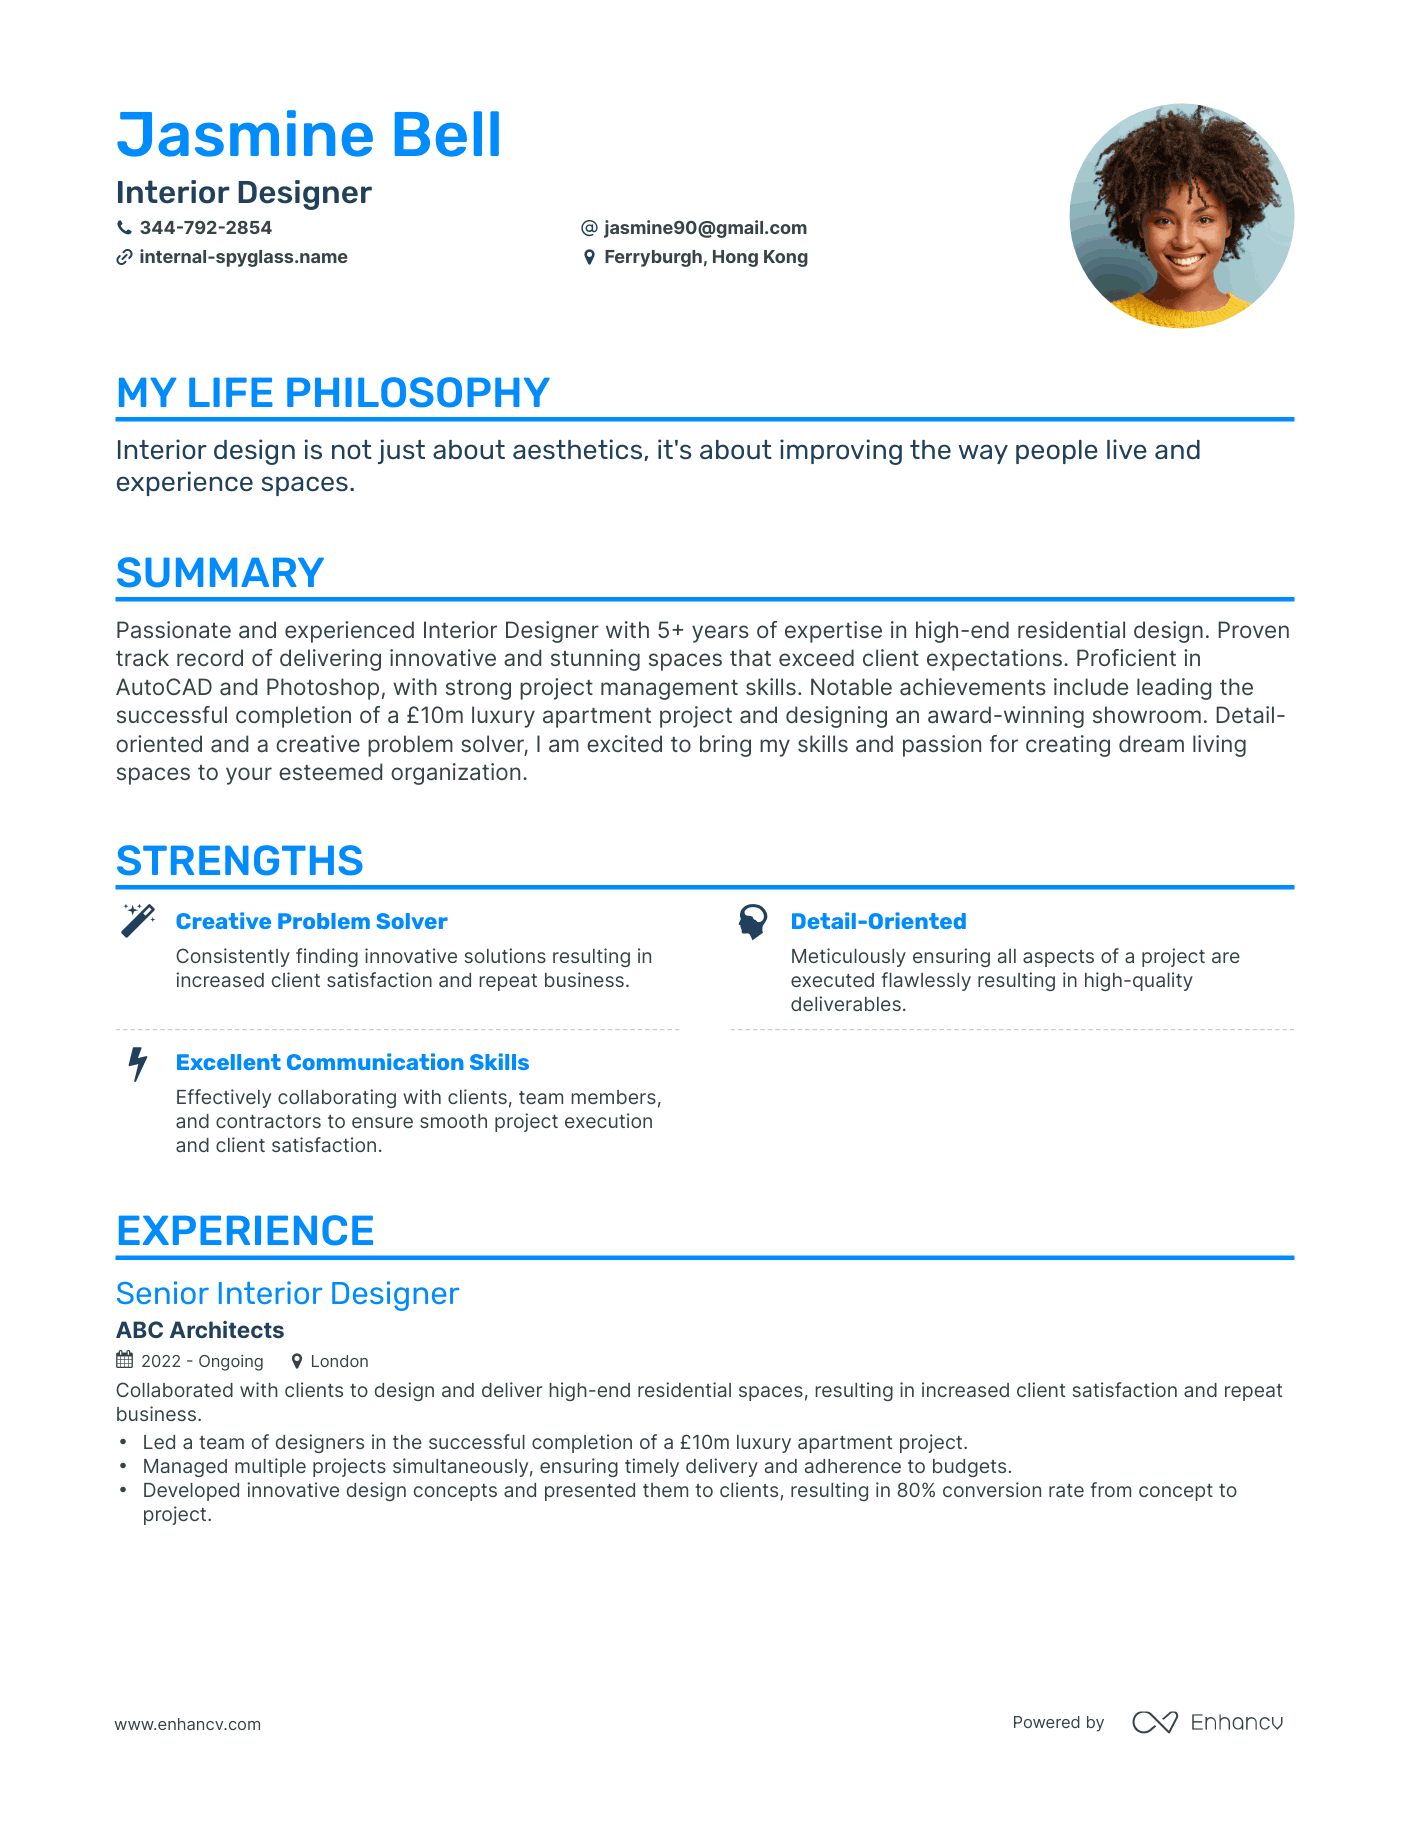 Interior Design Resume: Examples and Skills [Guide for 2023]